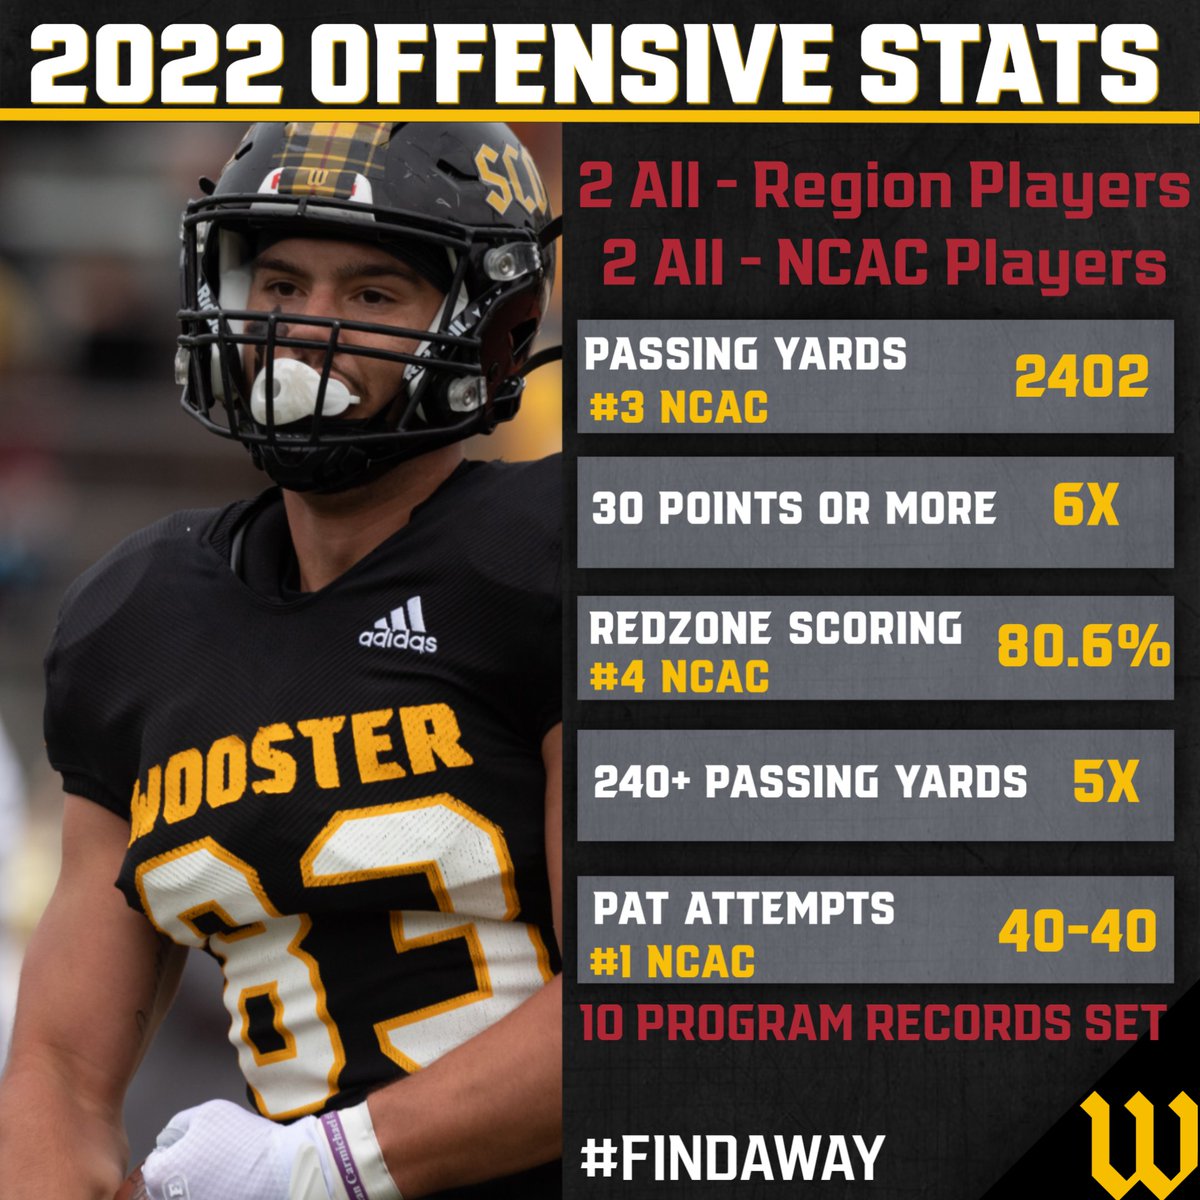 Here are some stats from 2022's Fighting Scots Offense! #GoScots #D3FB #NCACFB